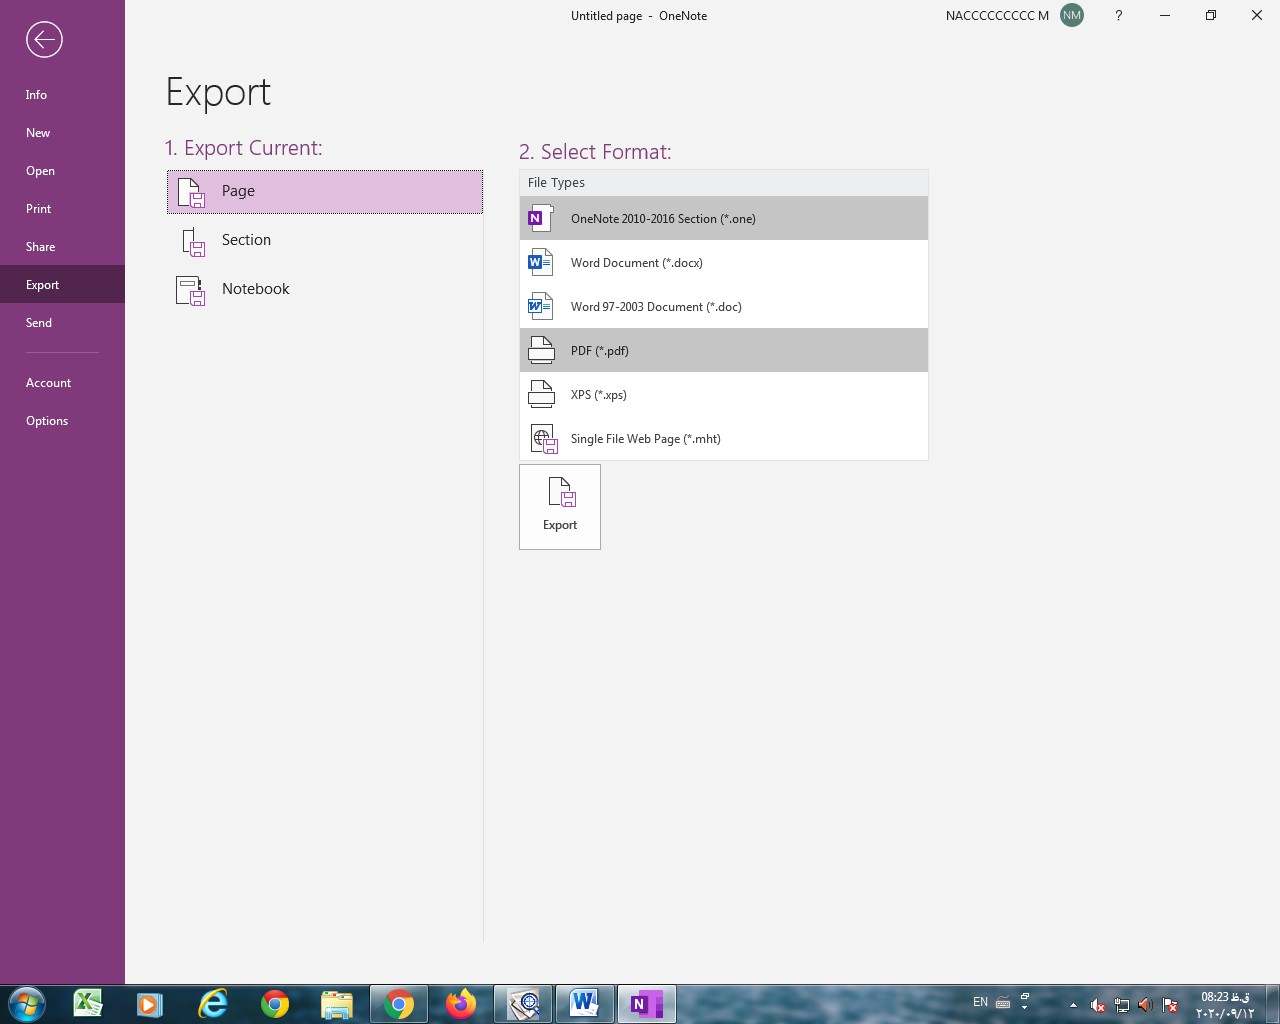 How to share a OneNote notebook 